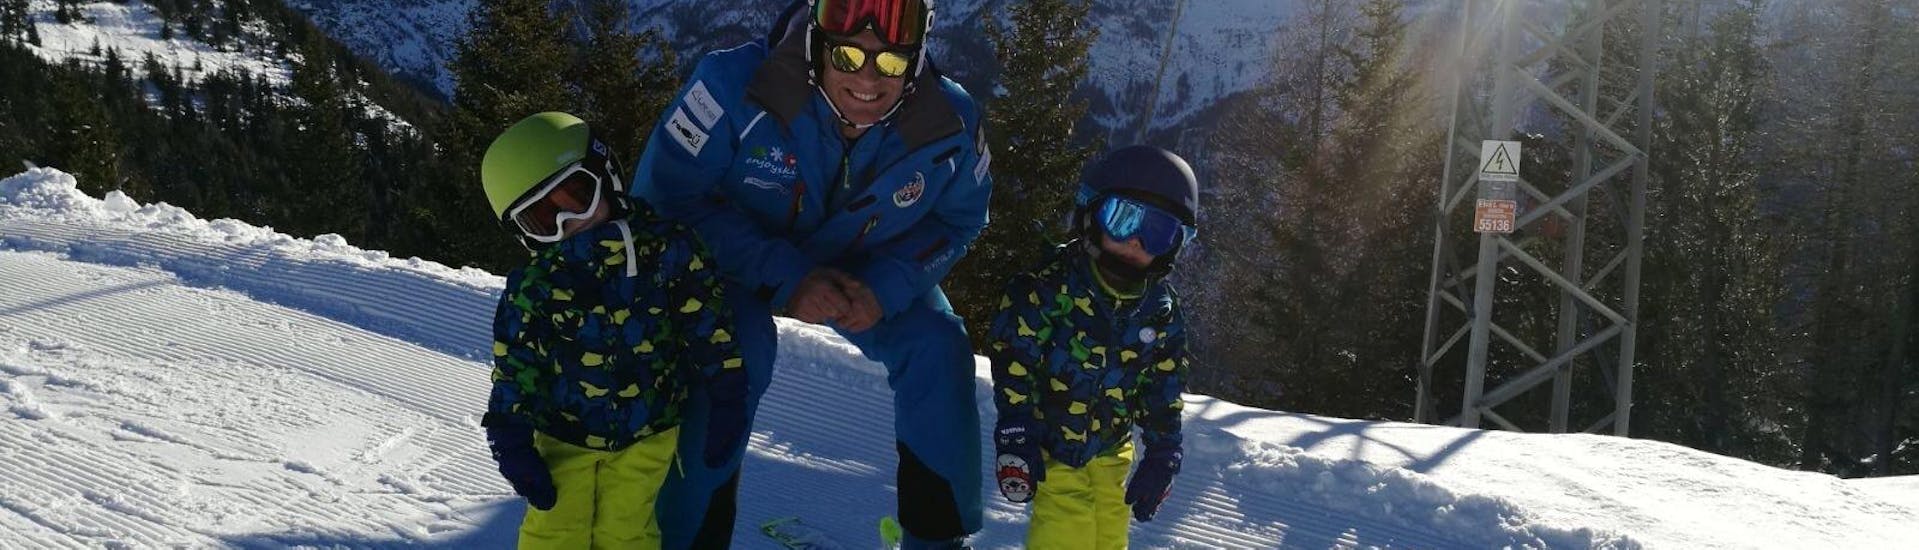 Ski instructor smiling with two kids during a Private Ski lessons For Kids all levels of Enjoyski School Valmalenco.